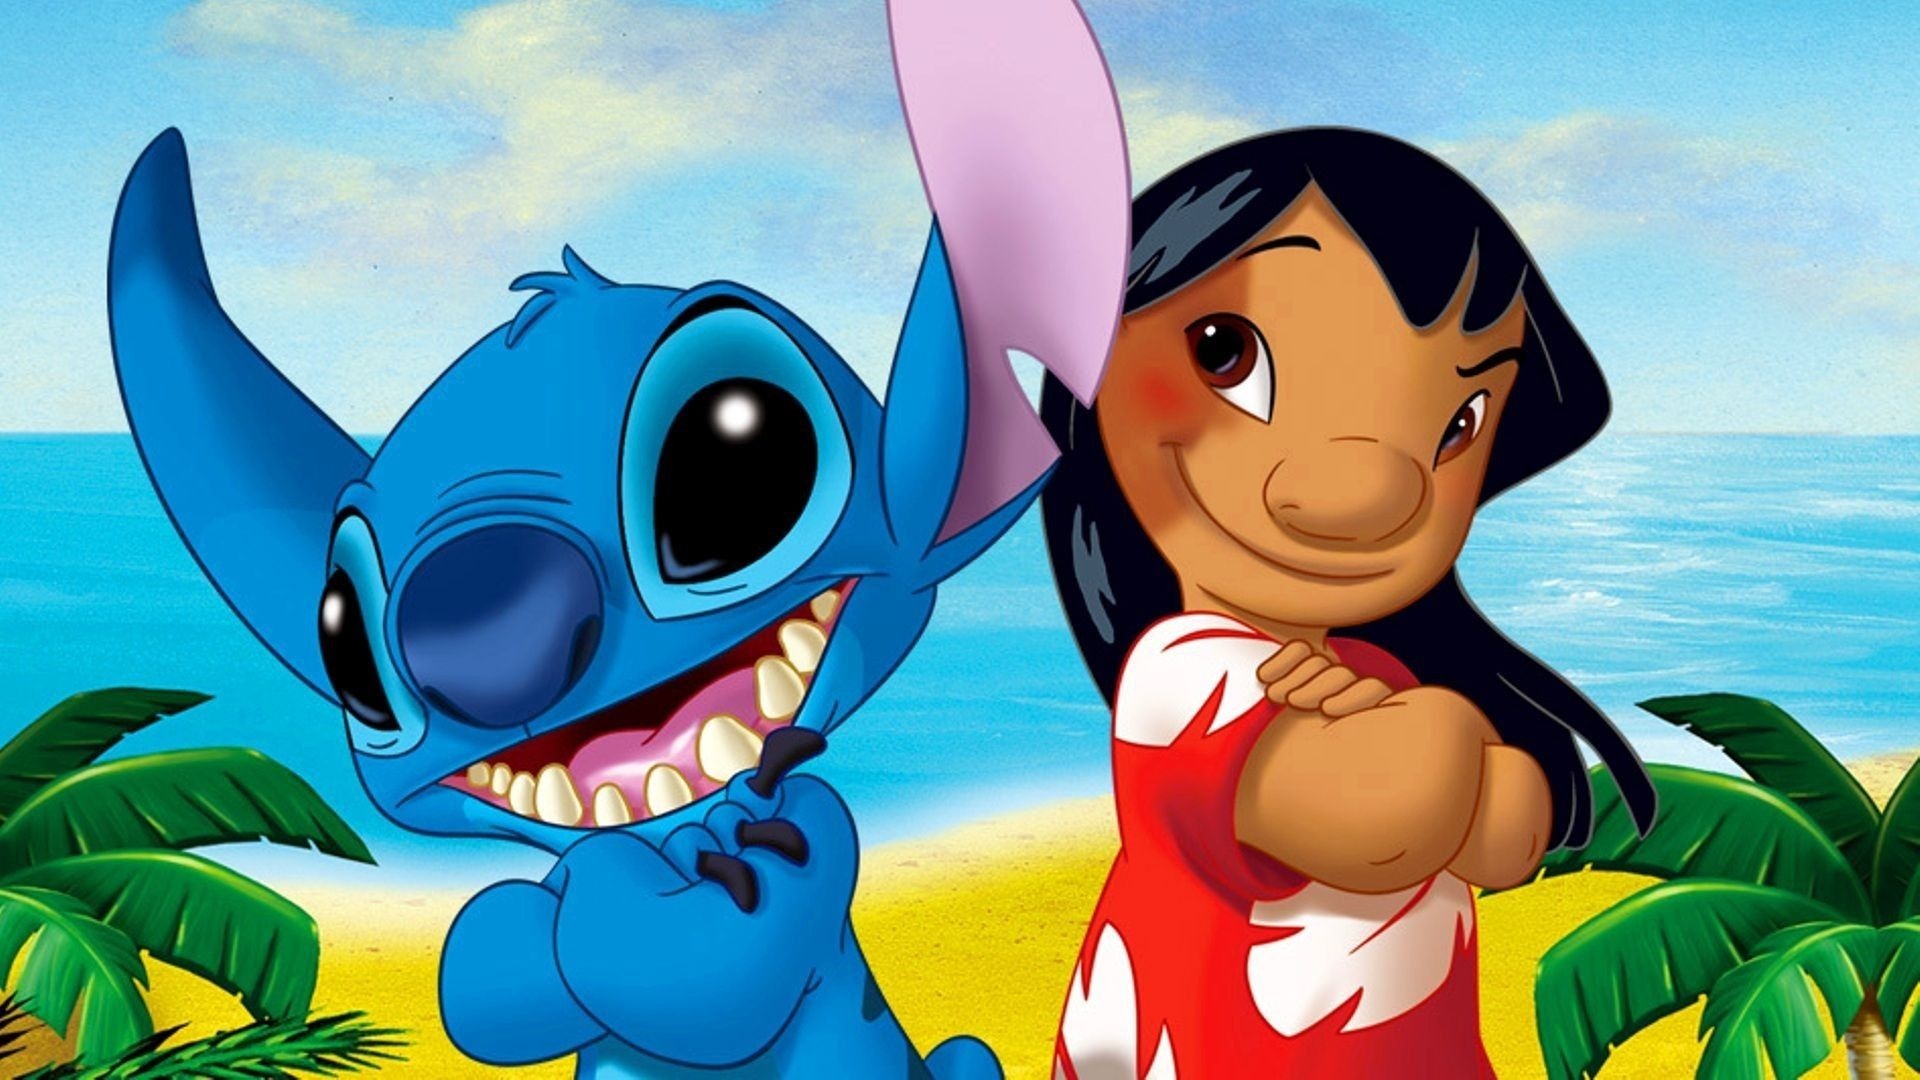 Lilo and Stitch series, Top free Lilo and Stitch backgrounds, Wallpapers, 1920x1080 Full HD Desktop